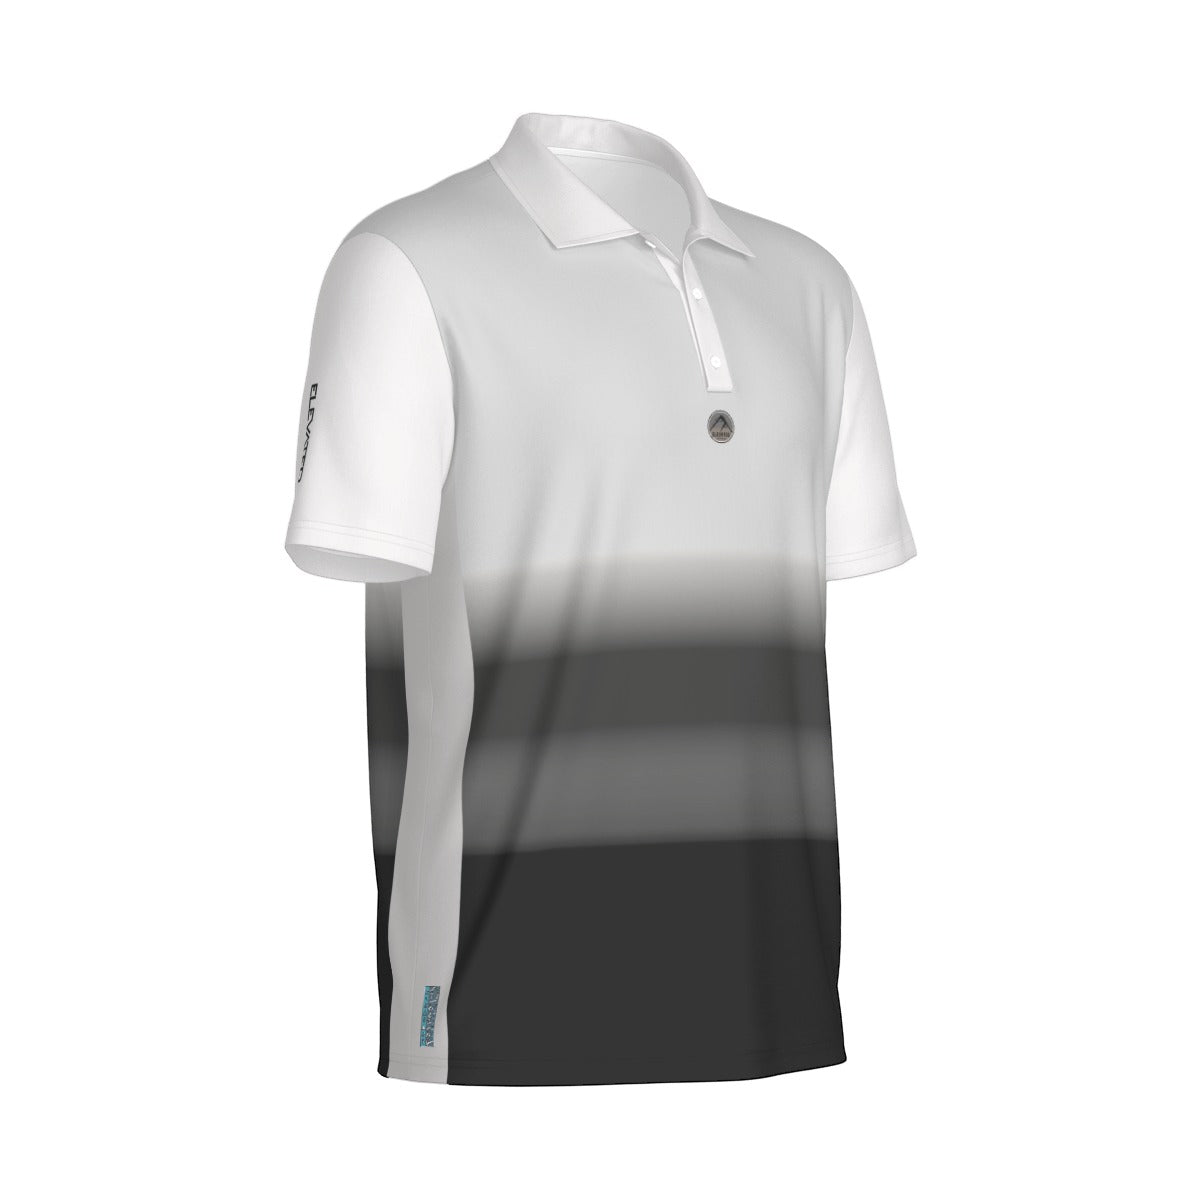 Elevated Graded breathable golf polo